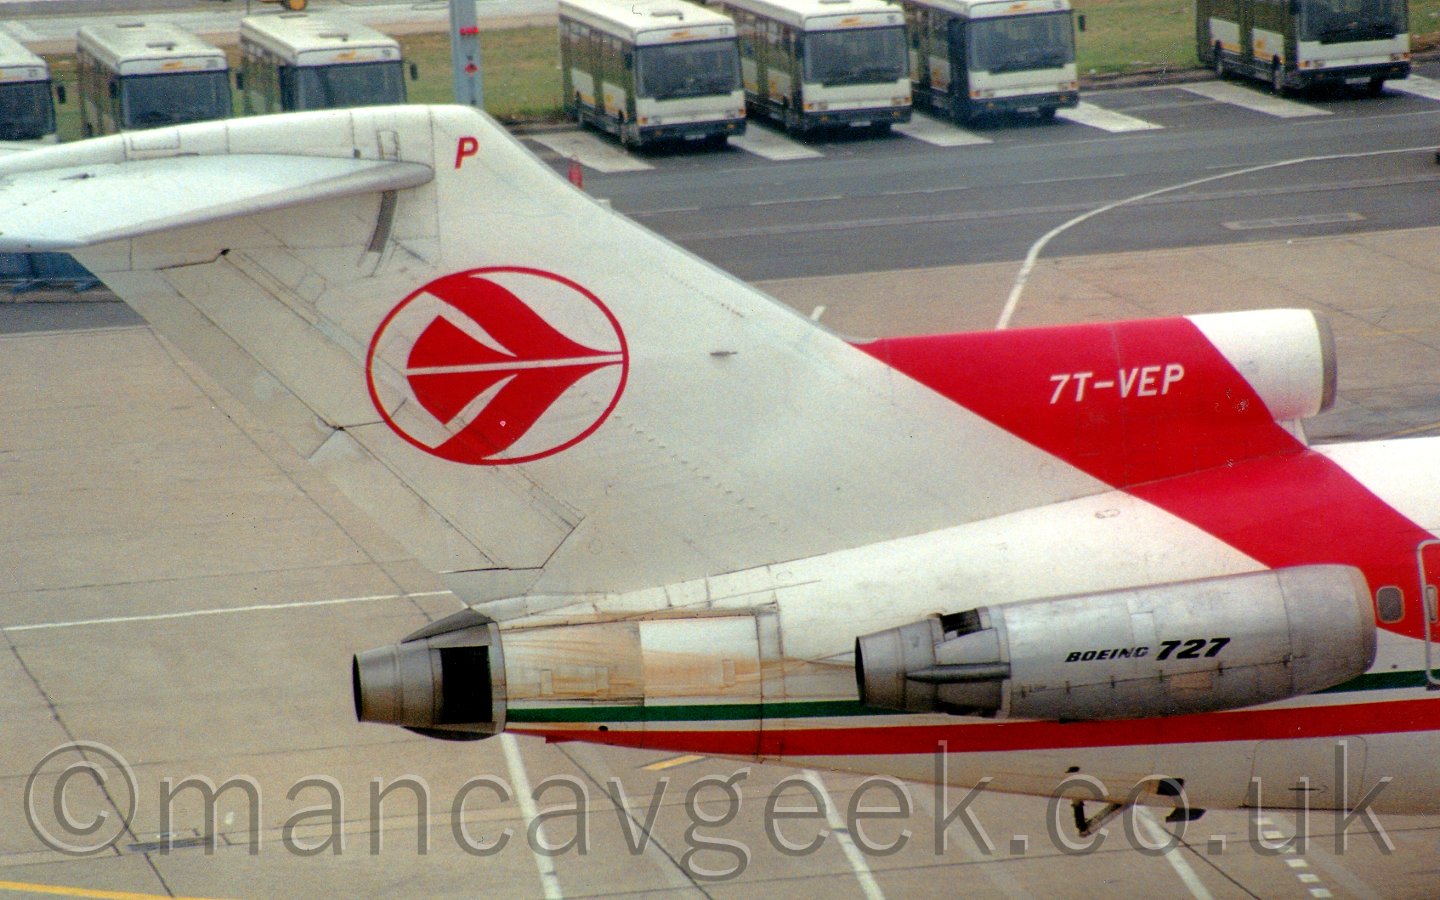 Close up of the tail of a 3 engined jet airliner with the engines mounted on the rear fuselage, taxiing from left to right. The plane is mostly white, with a thin green and red cheatline running along the bodywith a thicker red stripe coming from the front and sweeping up over the centre engine air intake, and the registration "7T-VEP" on the engine intake in white. The side-mounted engines have "Boeing 727" titles in black There is the outline of a red circle on the tail, with a stylised flying red bird in the middle, and the letter "P" at the top of the tail. In the background, a row of busses are lined up, all facing towards the camera, on the far side of the taxiway.